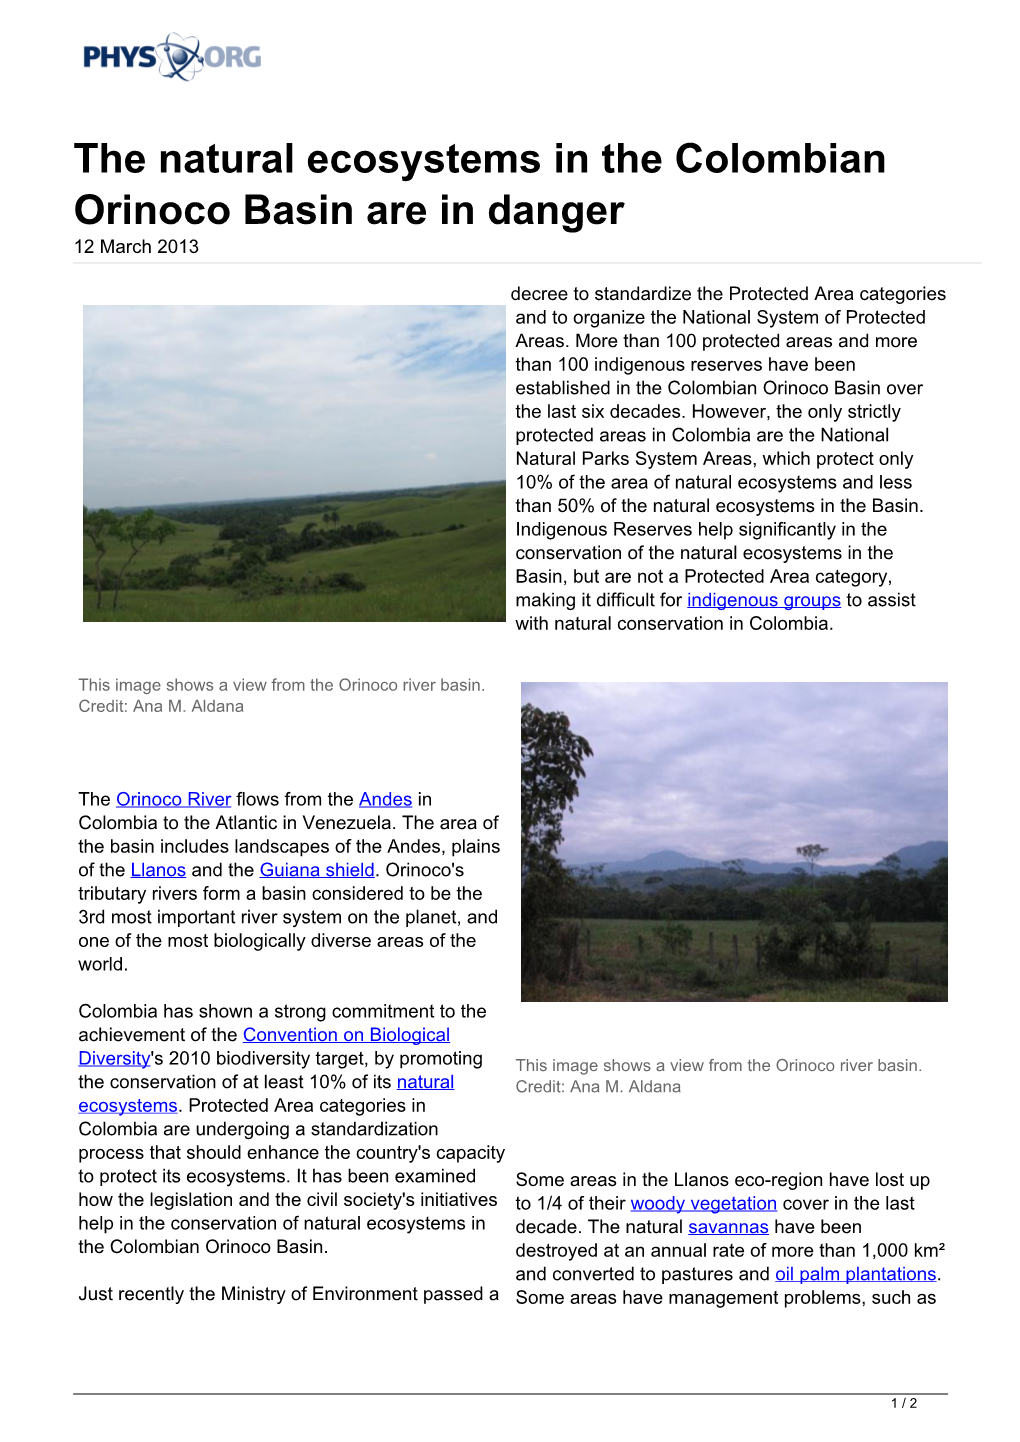 The Natural Ecosystems in the Colombian Orinoco Basin Are in Danger 12 March 2013